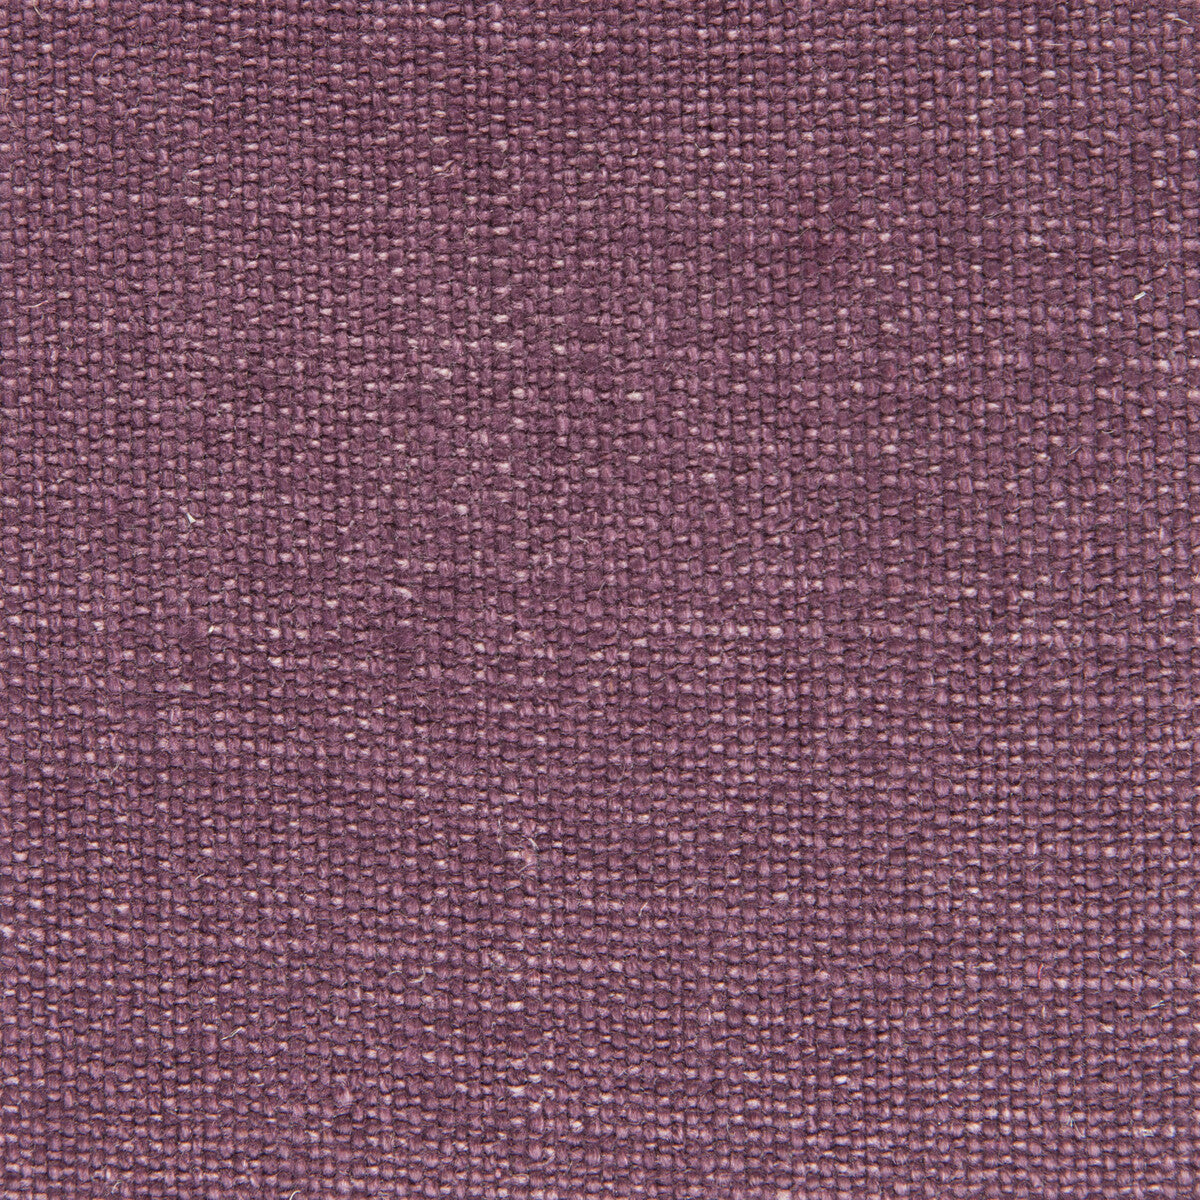 Nicaragua fabric in granate color - pattern GDT5239.003.0 - by Gaston y Daniela in the Basics collection